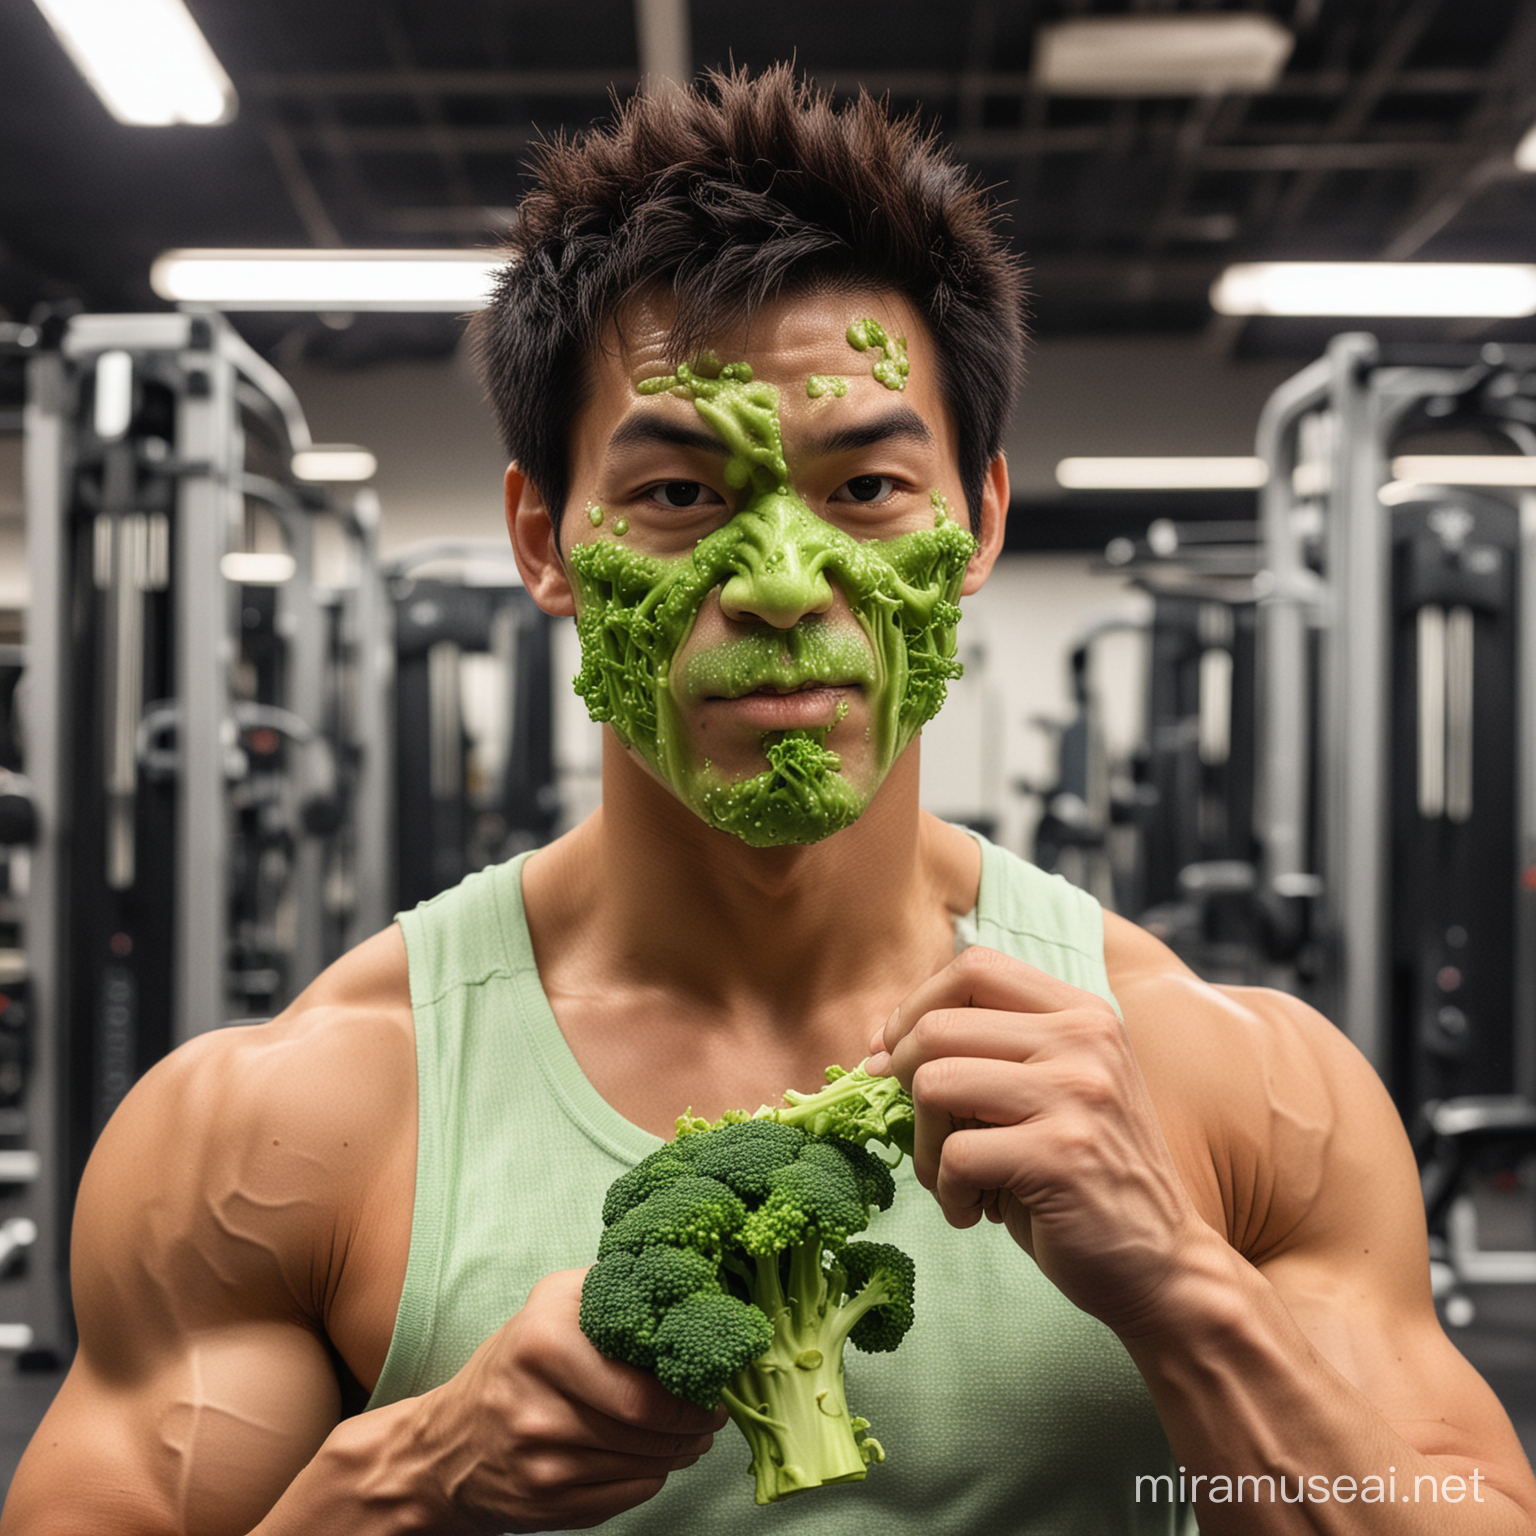 Muscular Asian Man Eating Glowing Broccoli in Fitness Center